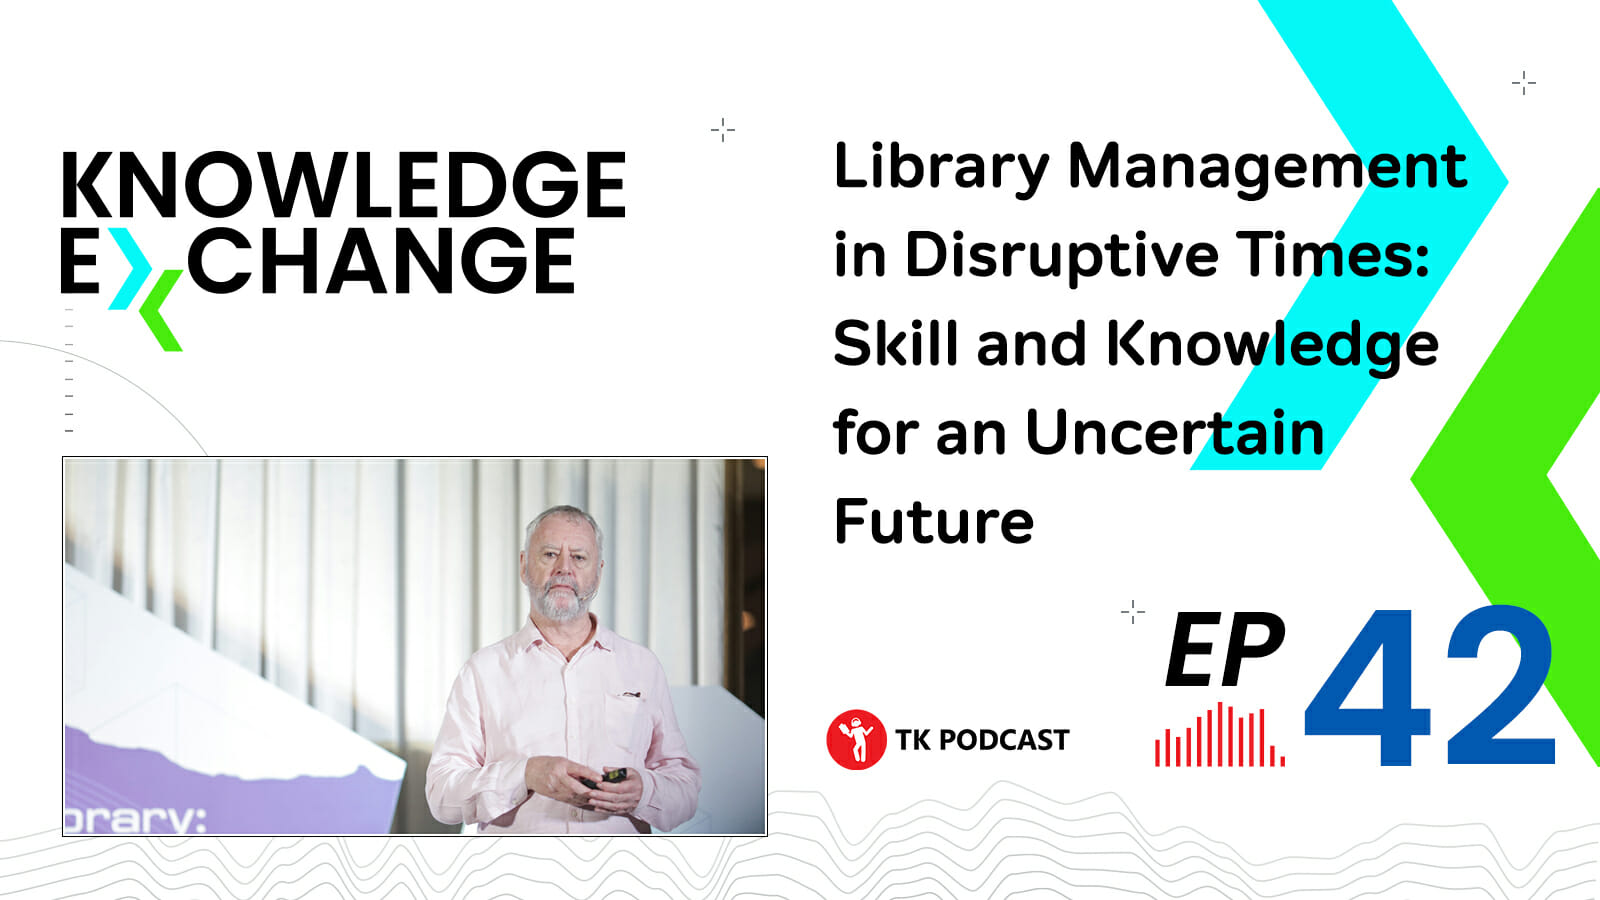 Library Management in Disruptive Times: Skill and Knowledge for an Uncertain Future